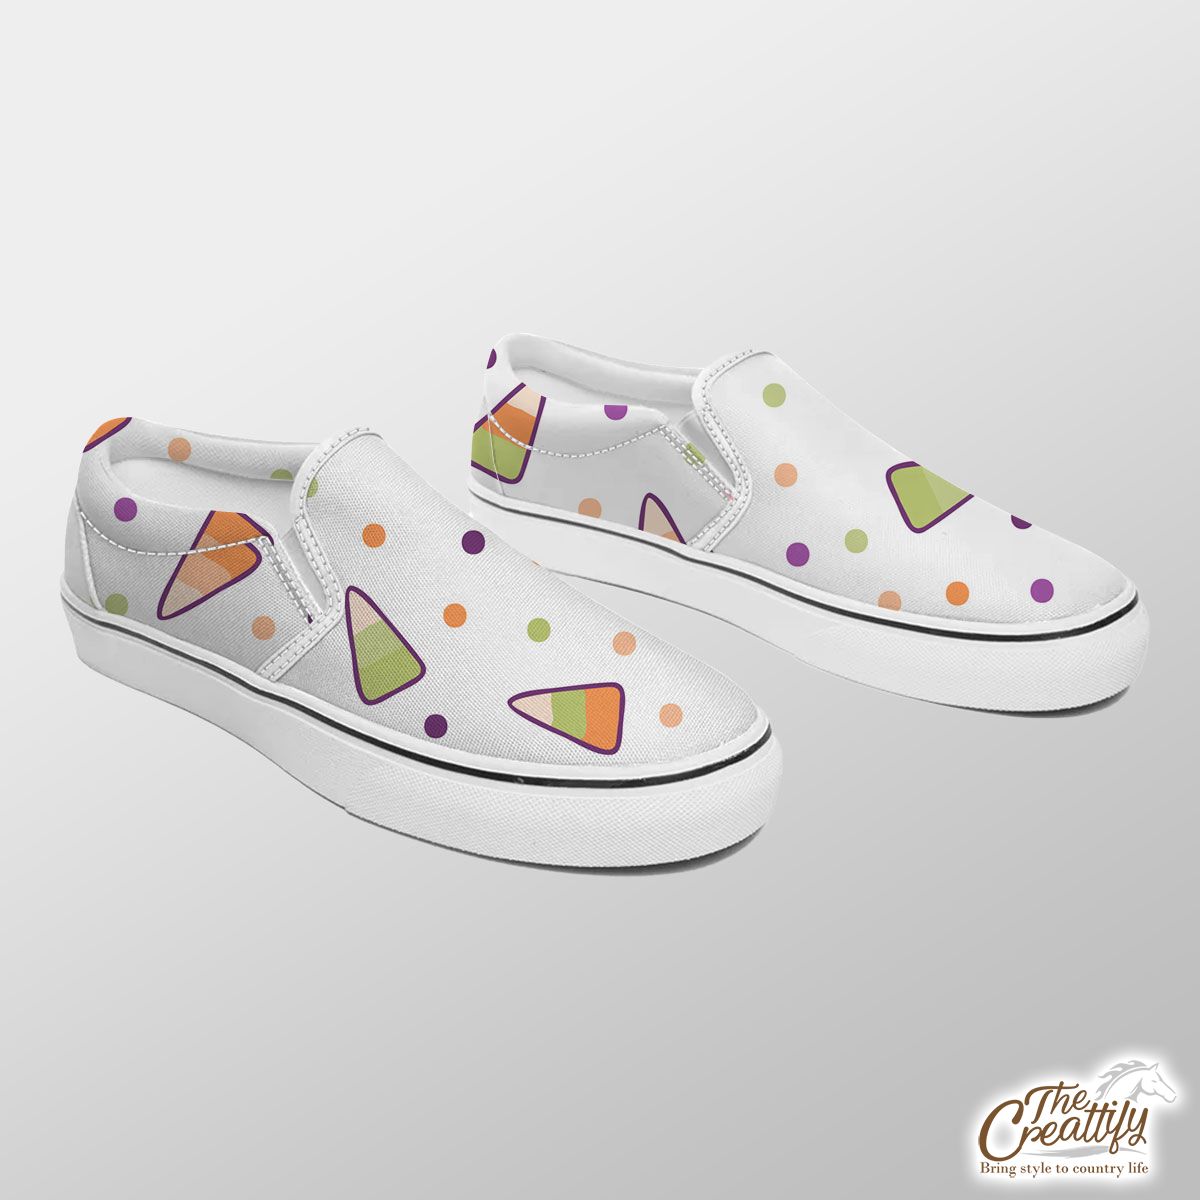 Halloween Candy Seamless Pattern With Polka Dot Slip On Sneakers